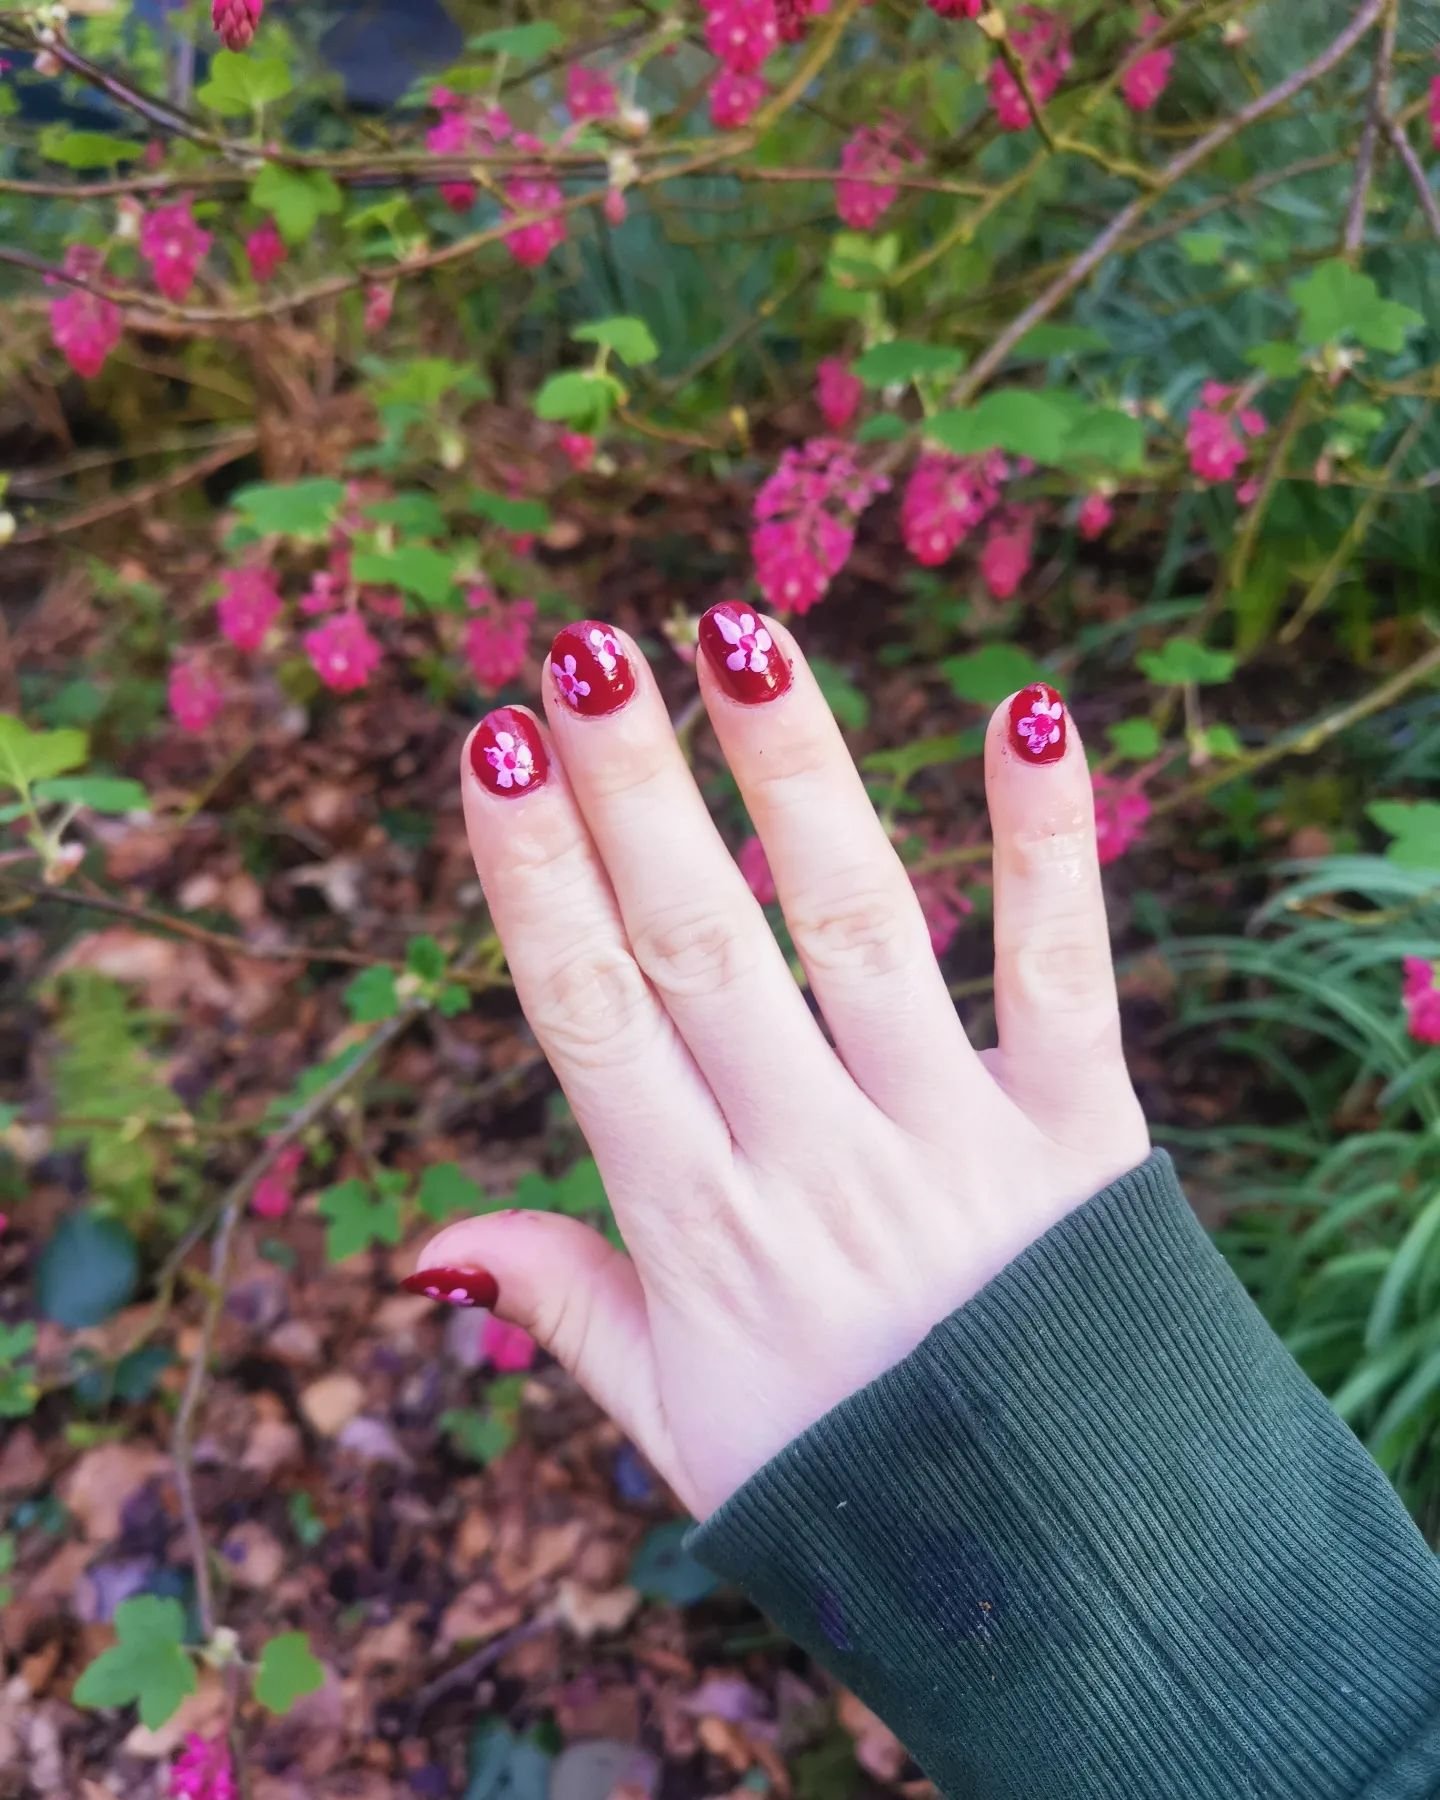 Embracing the spring surroundings with this #manicuremonday 🌸💕

💅 Featuring shades Vamp, Cotton Candy and Oh lala!

What do you want to see next week? Comment below!

#nailart #nails  #nailsofinstagram #nail #manicure #gelnails  #nailsoftheday #na